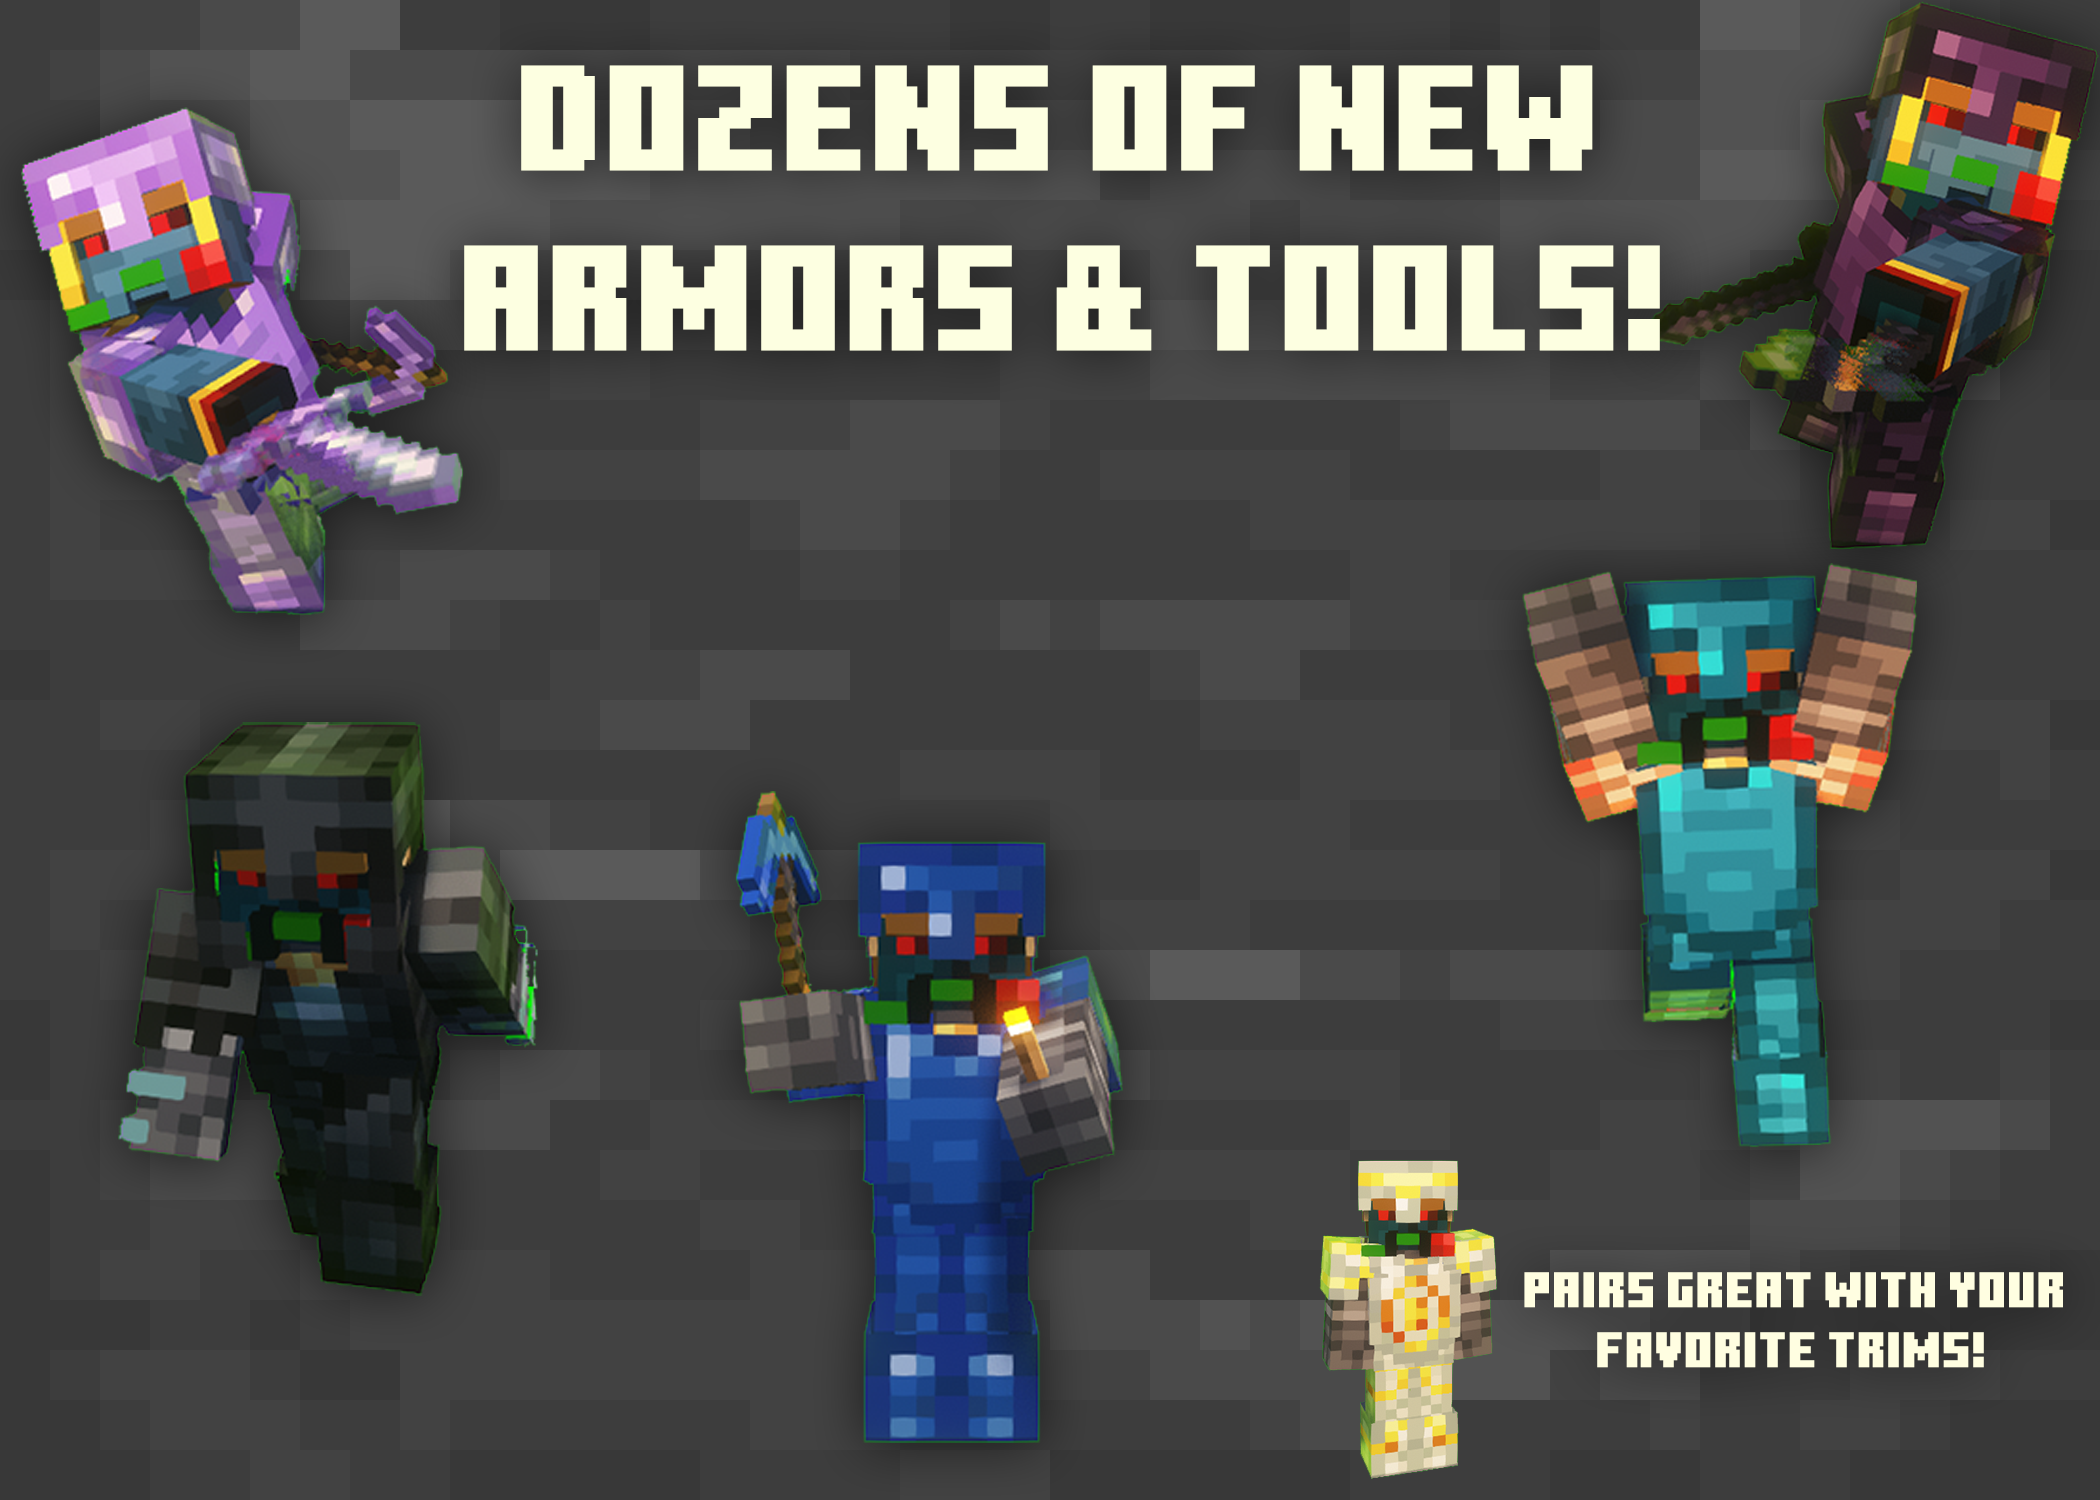 Dozens of New Armors and Tools!